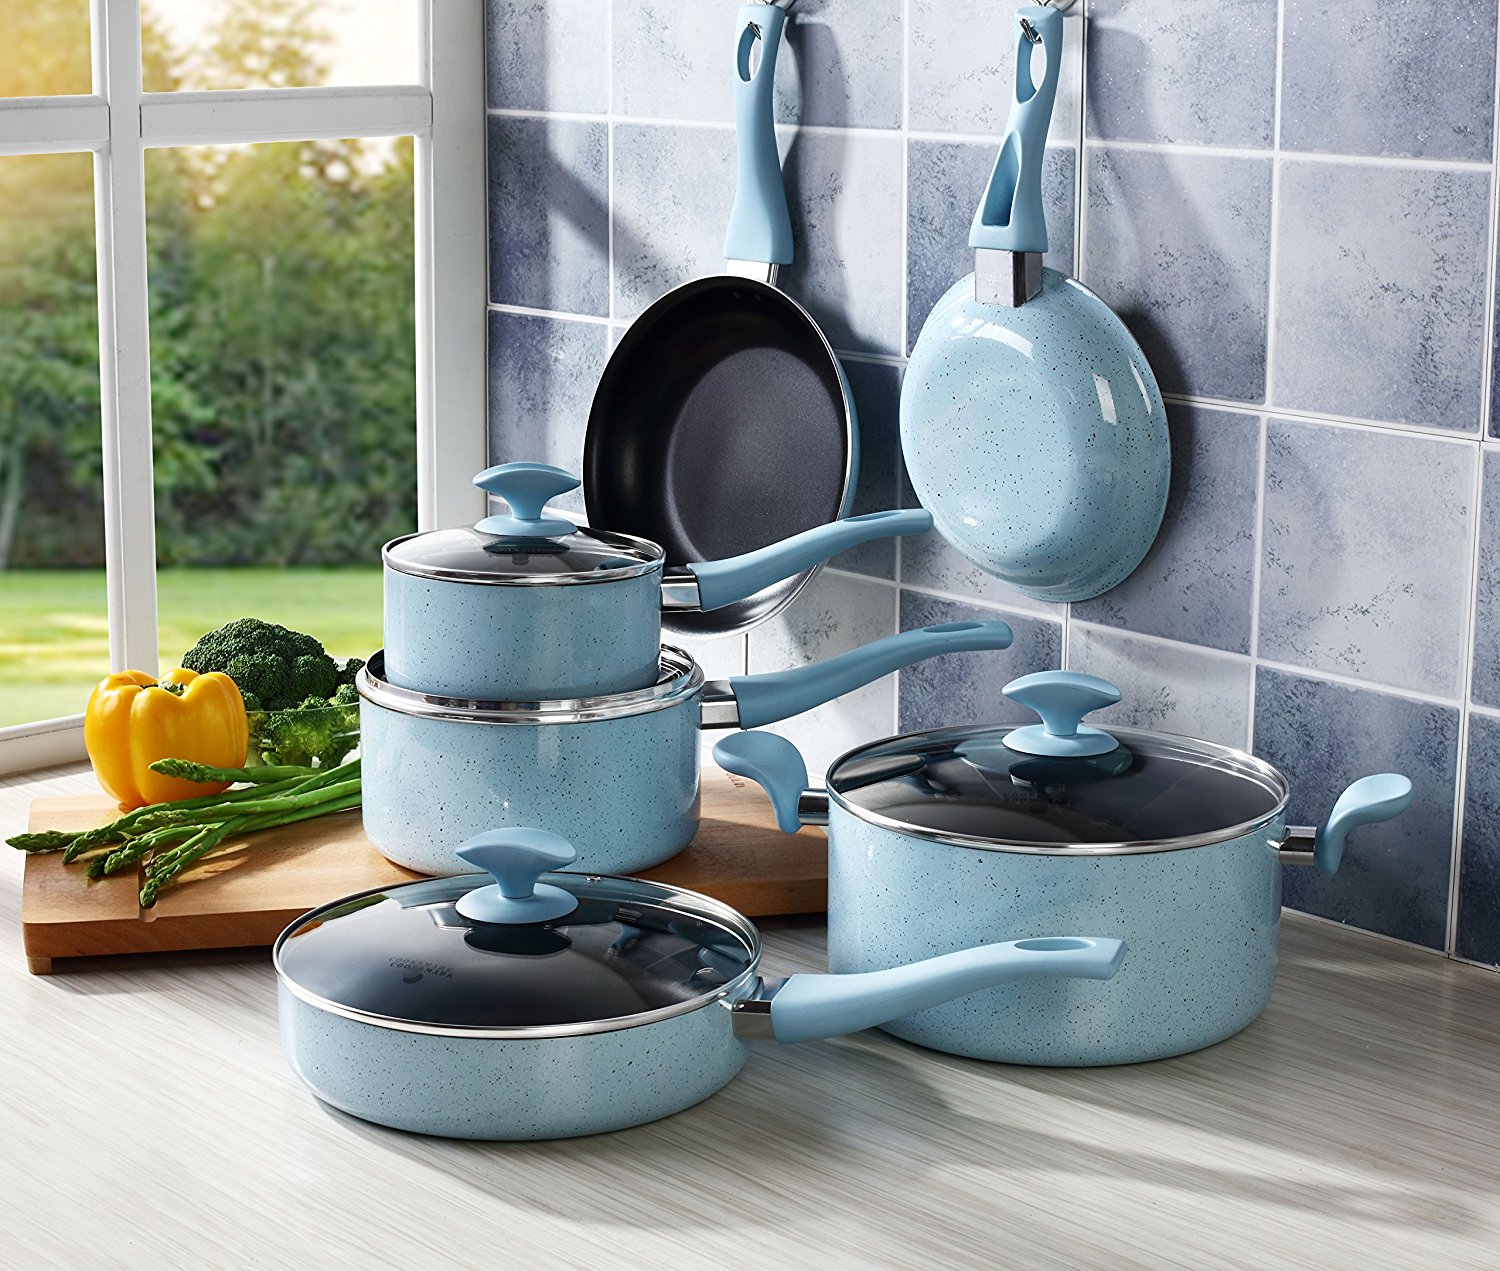 5 Things To Look For In The Best Cookware